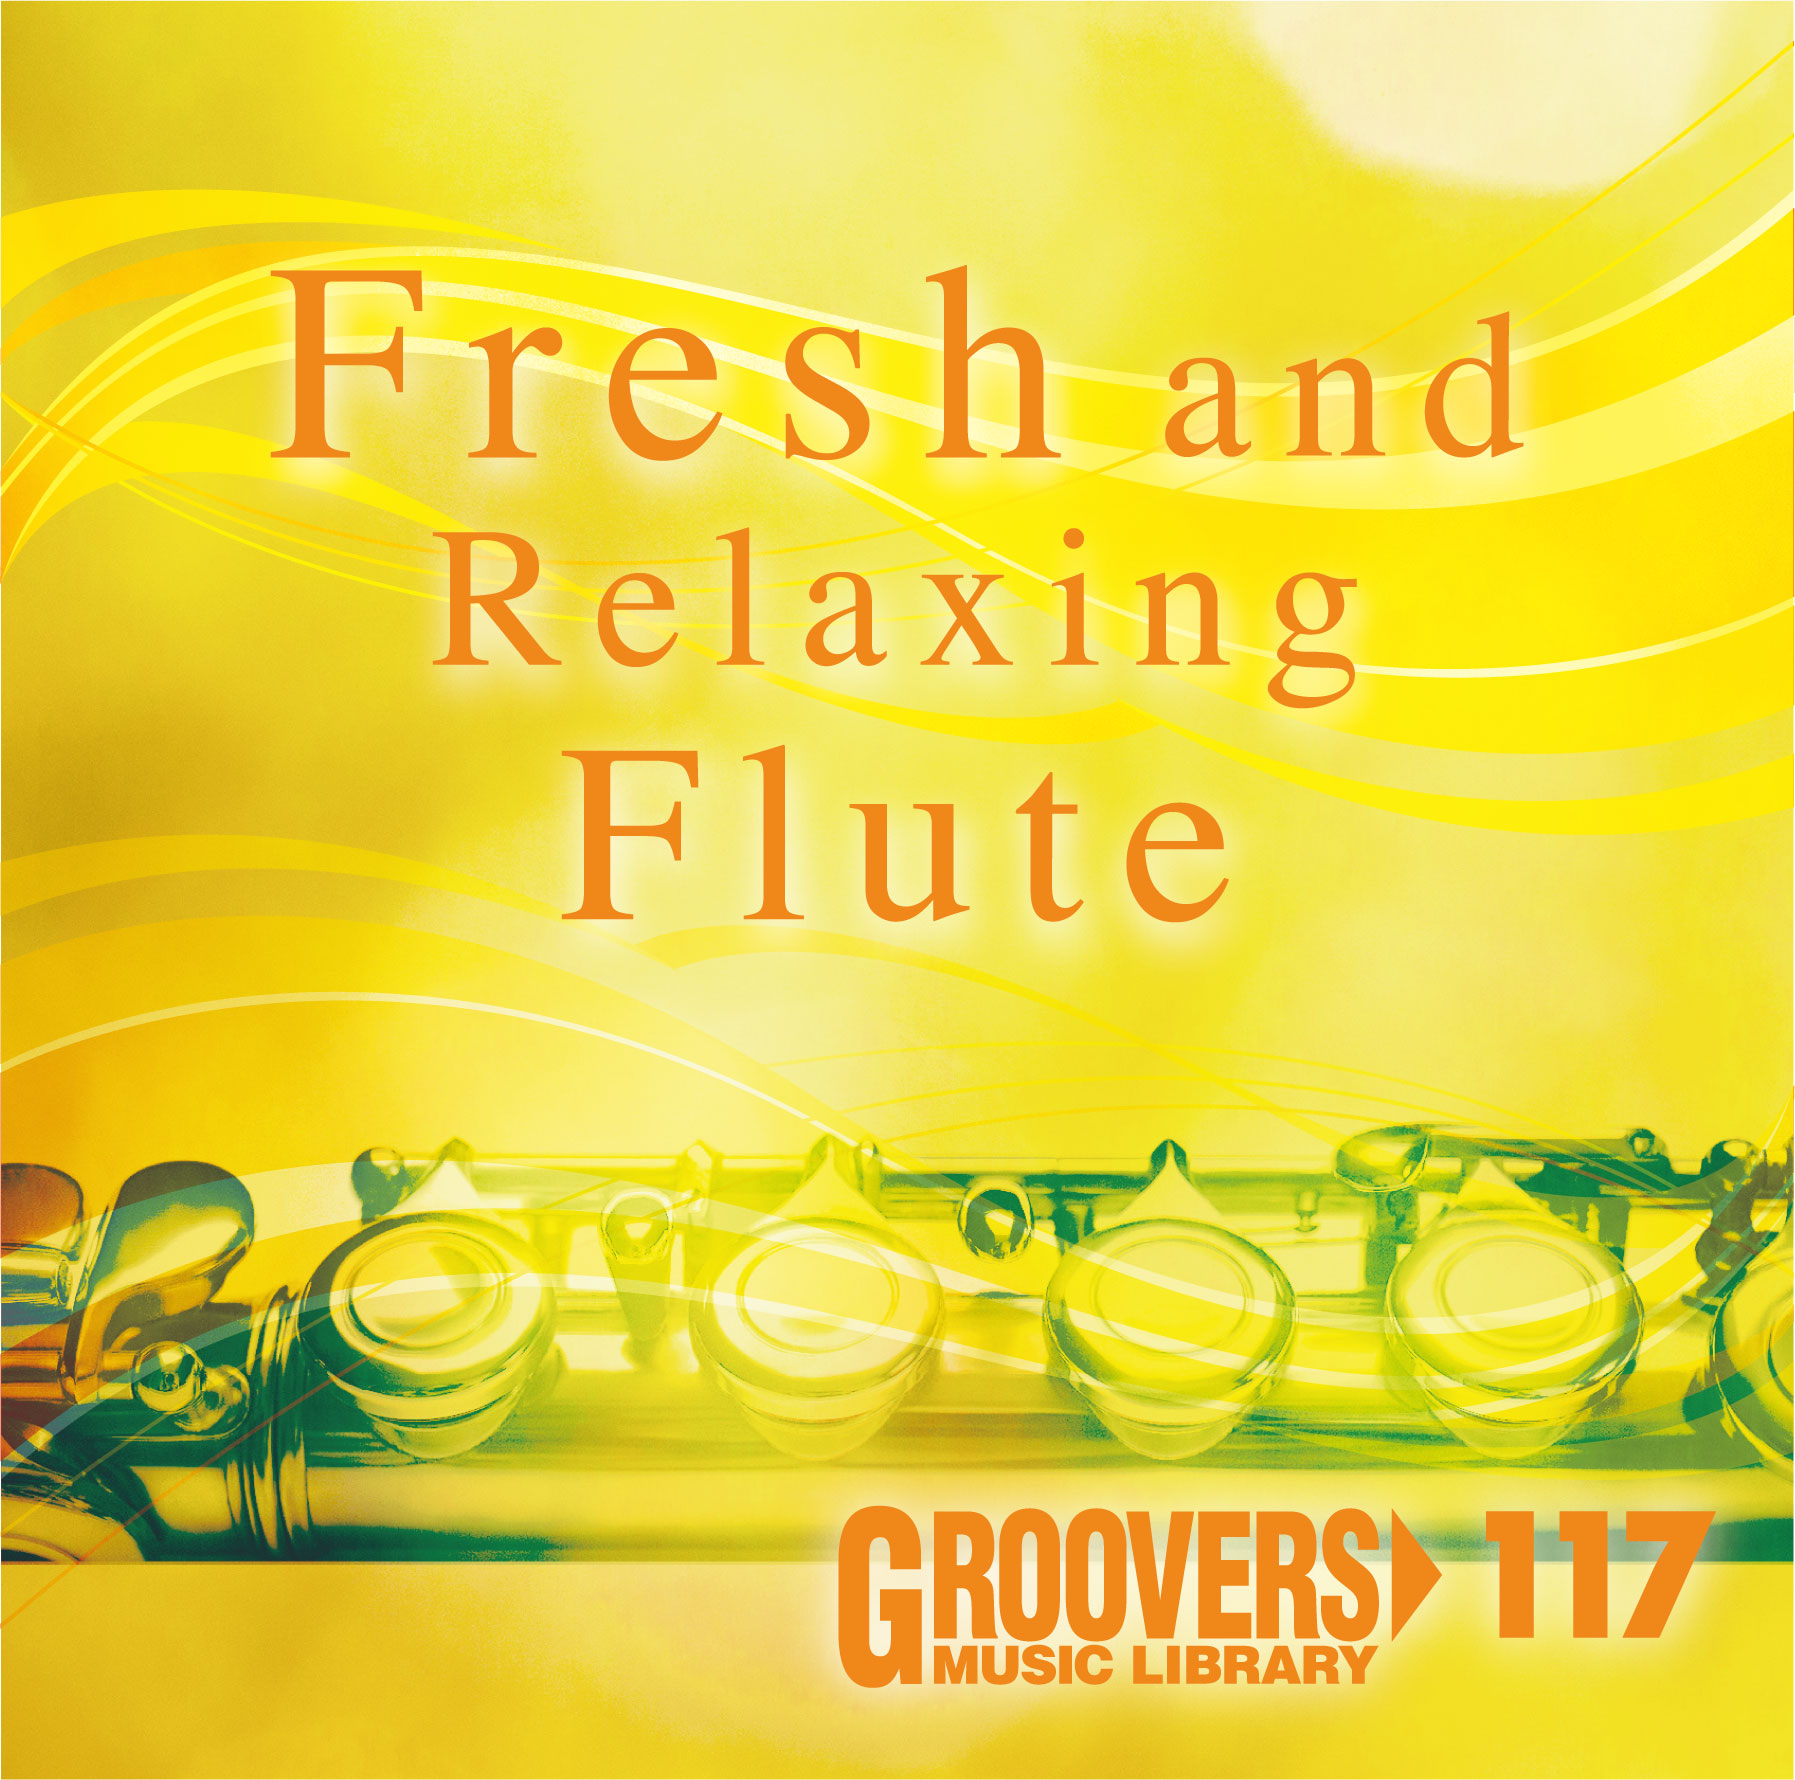 Fresh and Relaxing Flute